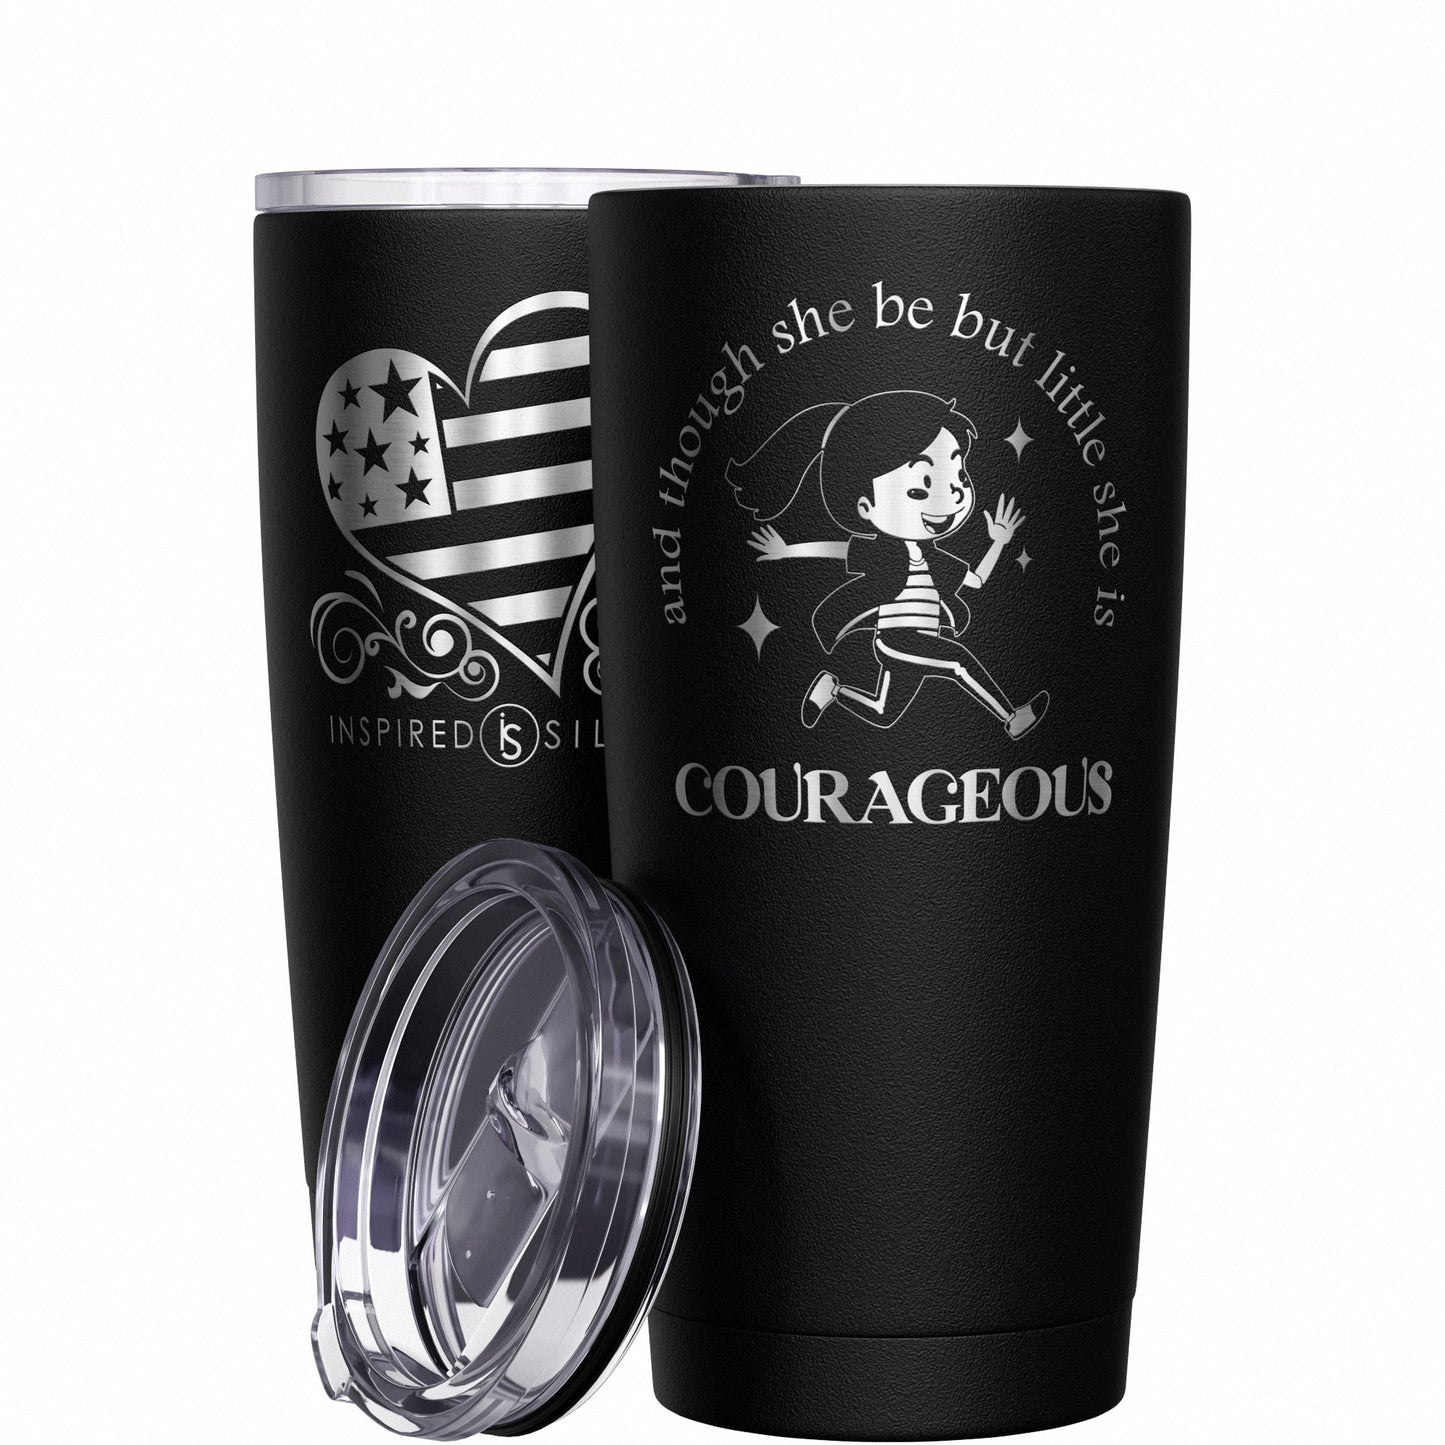 And Though She Be but Little She Is Courageous Tumbler